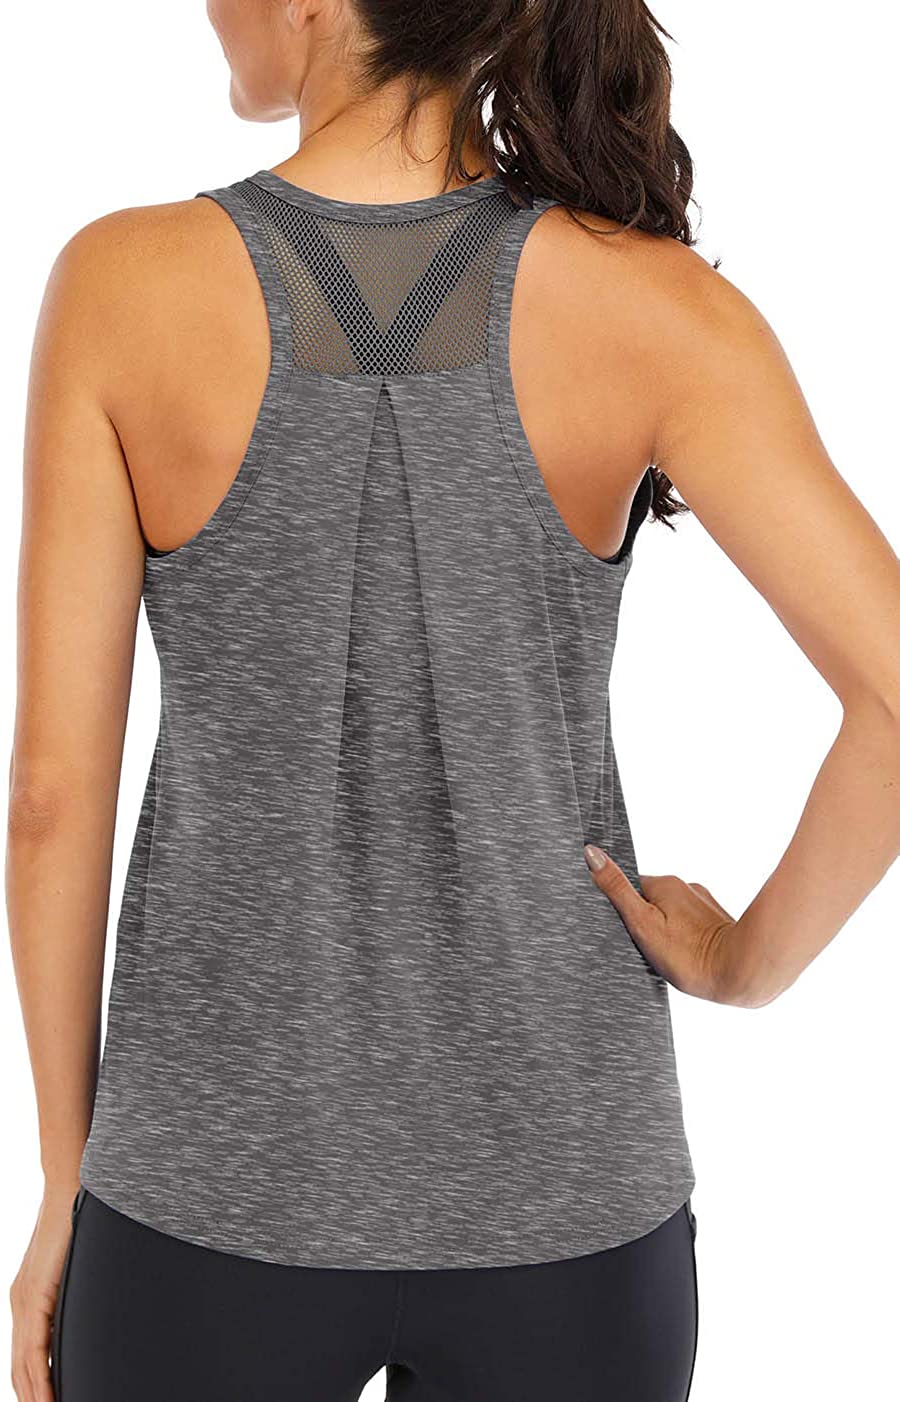 Fihapyli ICTIVE Workout Tops for Women Loose fit Racerback Tank Tops for Women Mesh Backless Muscle Tank Running Tank Tops 